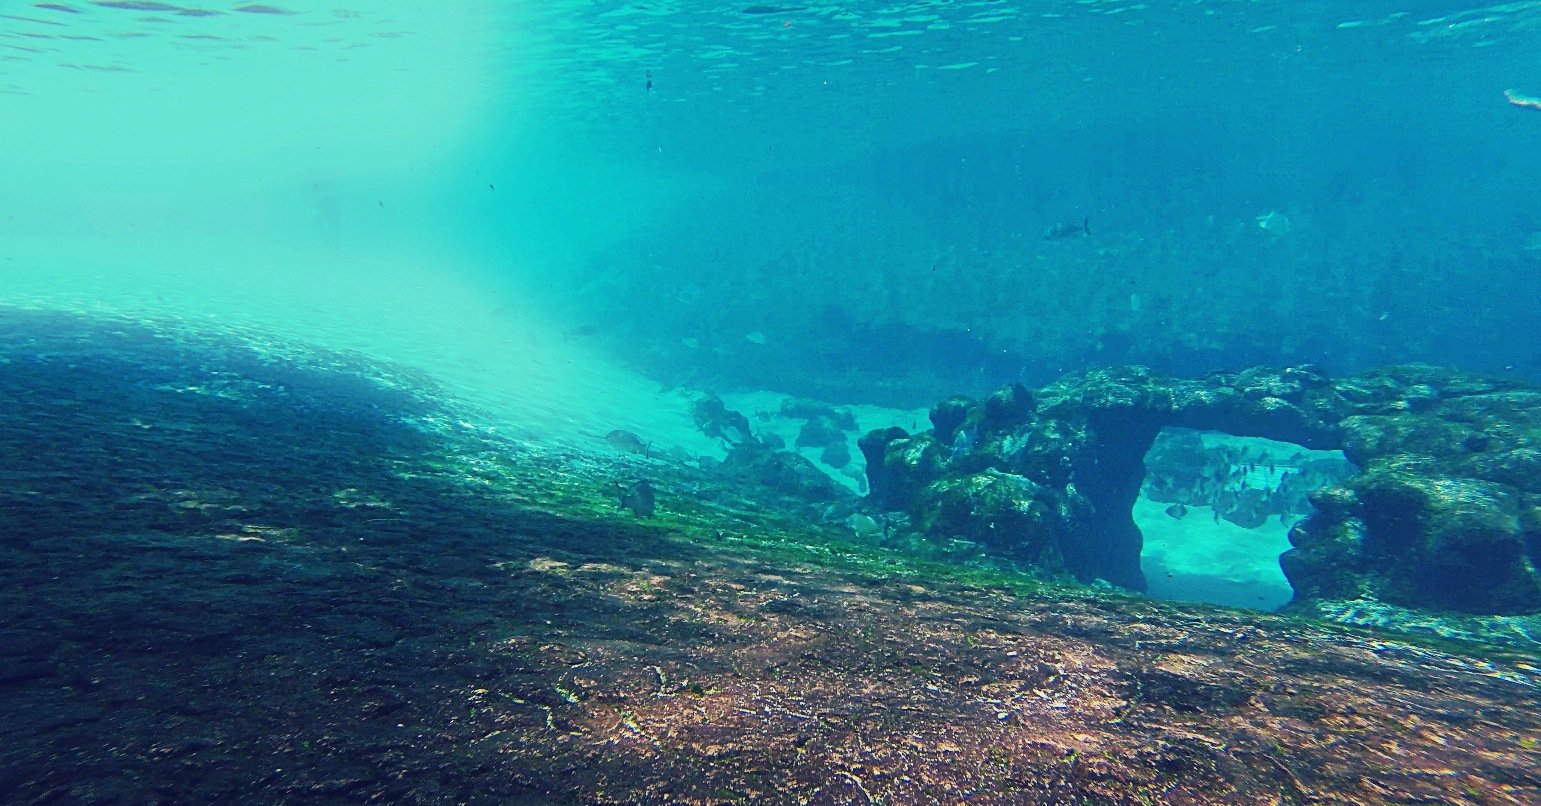 A still underwater in one of the tropical swimming pools with fish and an artificial reef.